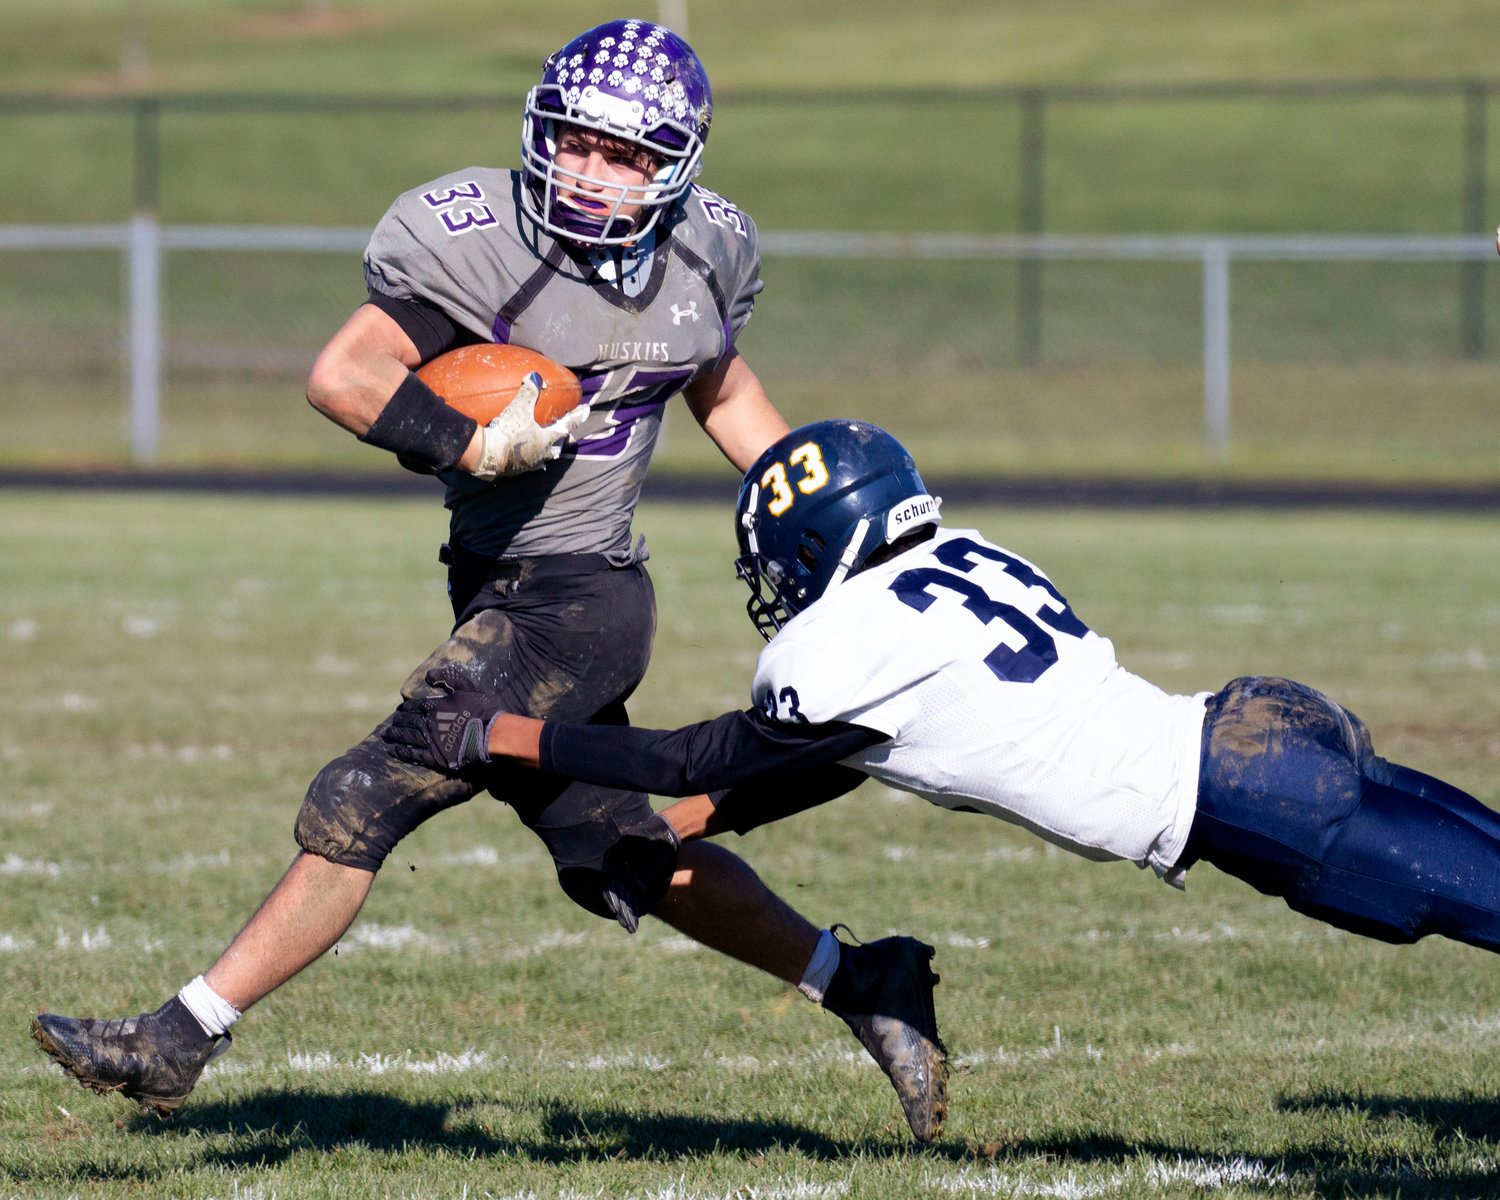 Brock Pacheco breaks a tackle during Mt. hope's loss to Barrington on Thanksgiving Day. Pacheco rushed for 154 yards and two touchdowns and shattered both the single season rushing record and touchdown records for Mt. Hope High School.